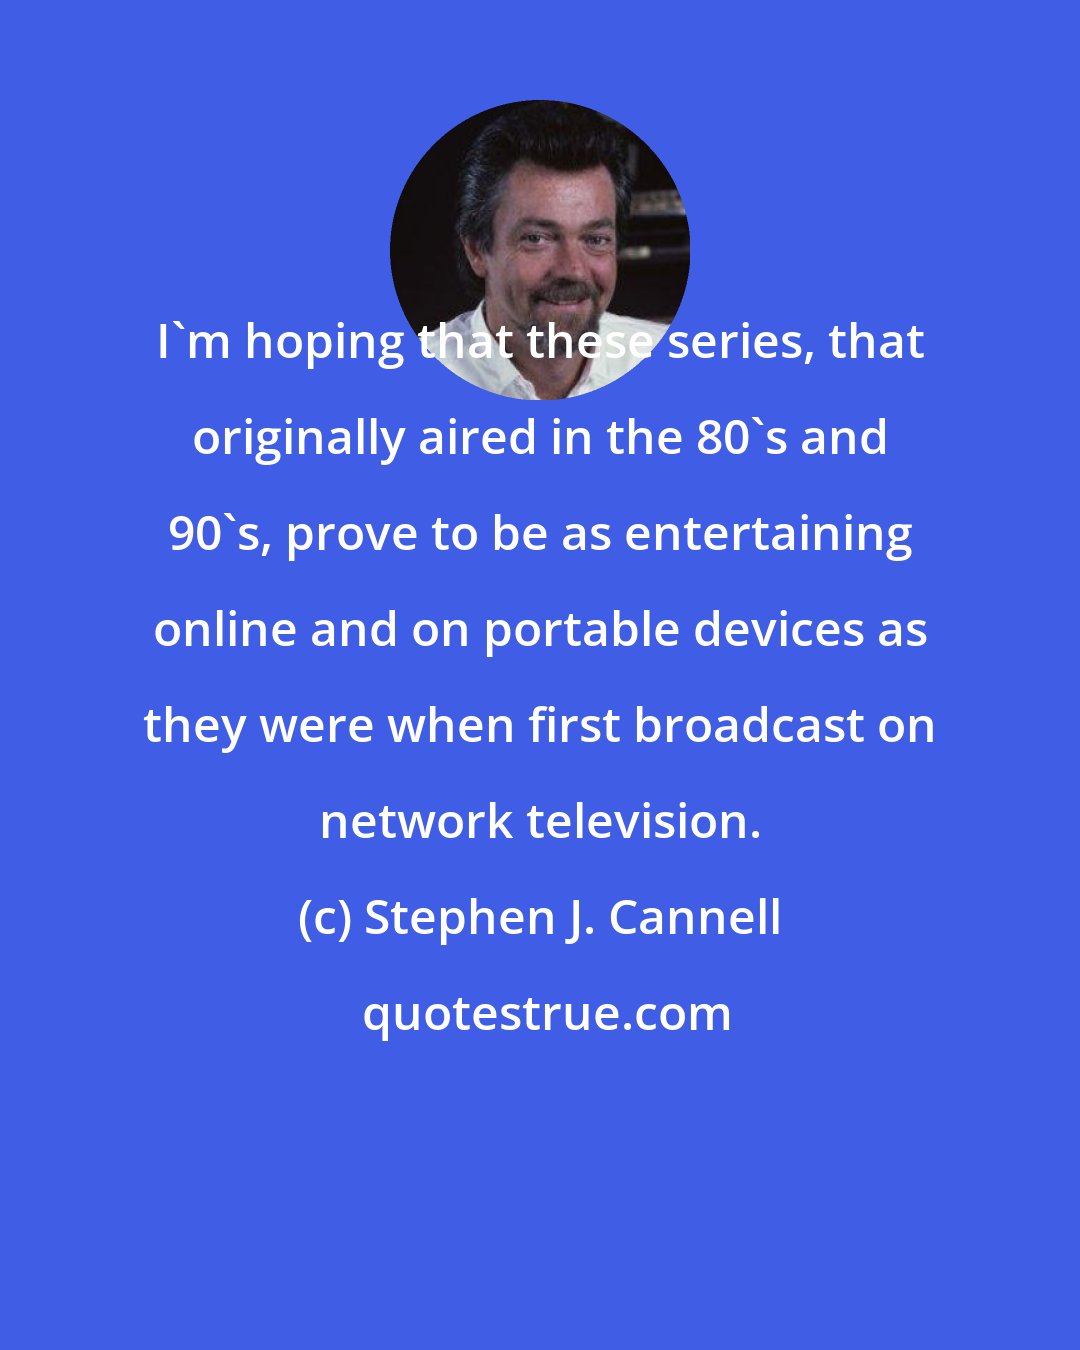 Stephen J. Cannell: I'm hoping that these series, that originally aired in the 80's and 90's, prove to be as entertaining online and on portable devices as they were when first broadcast on network television.